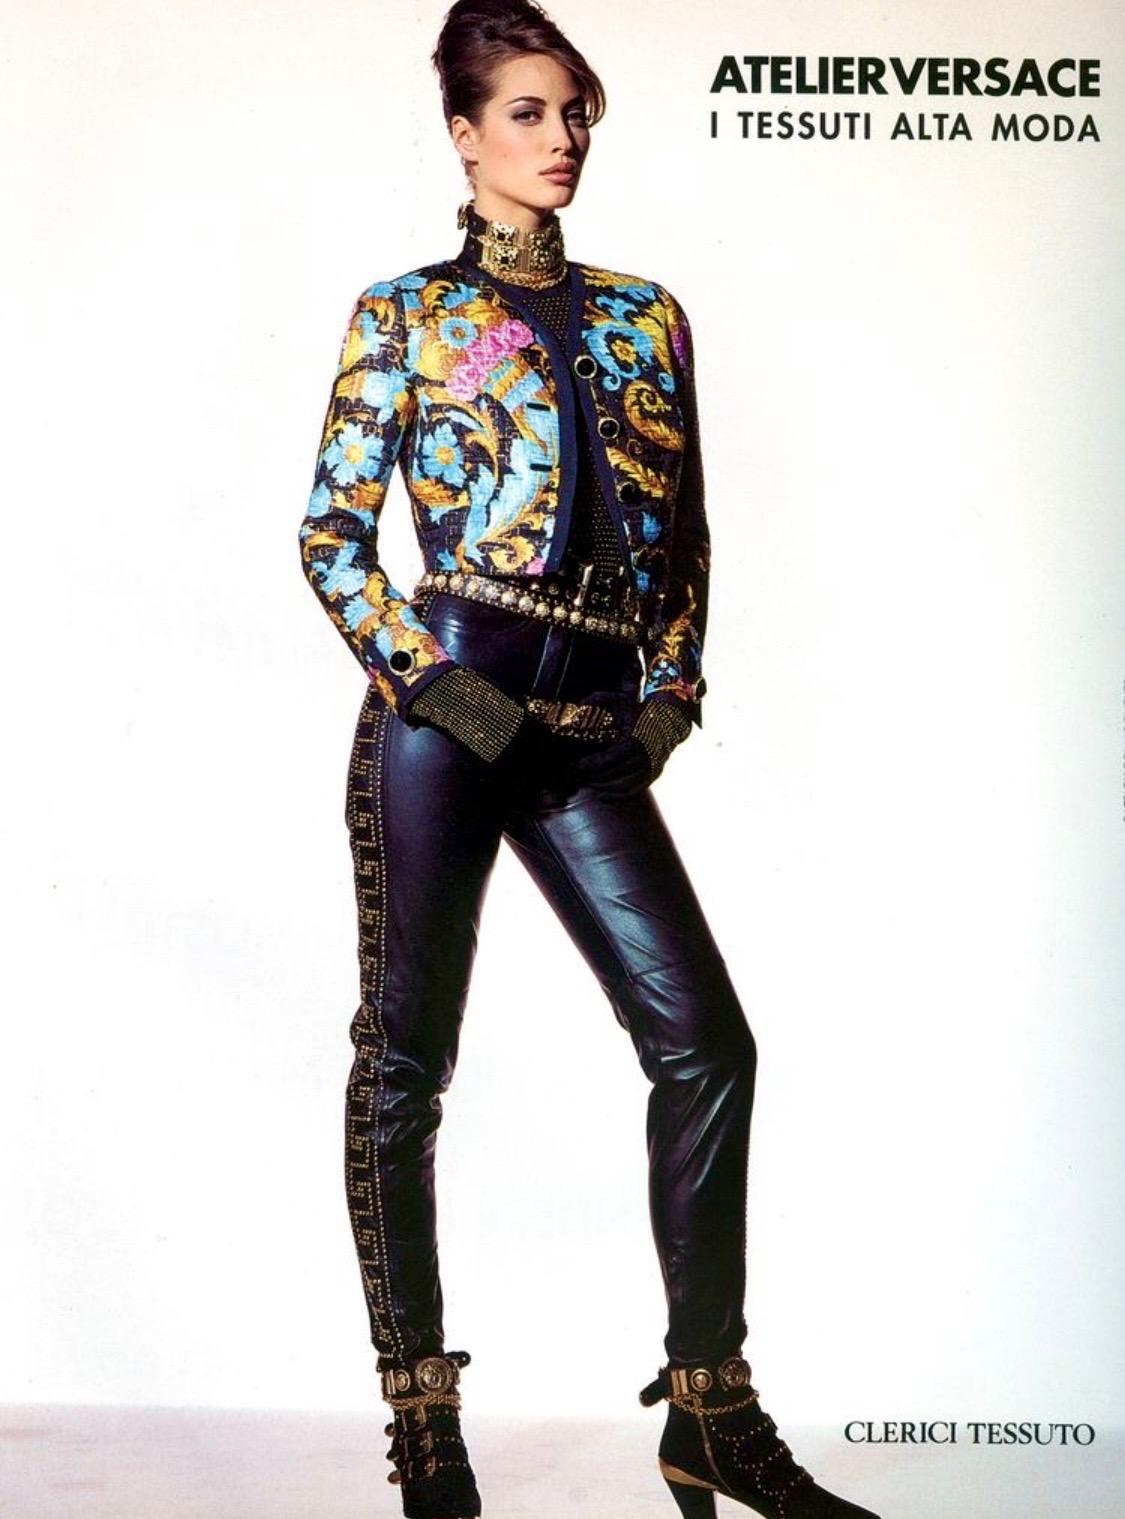 Presenting the studded Versace pants of your dreams, designed by Gianni Versace. These pants are from the F/W 1992 'Miss S&M' collection, commonly known as the 'bondage' collection. The leather version of these pants debuted in the Fall/Winter 1991